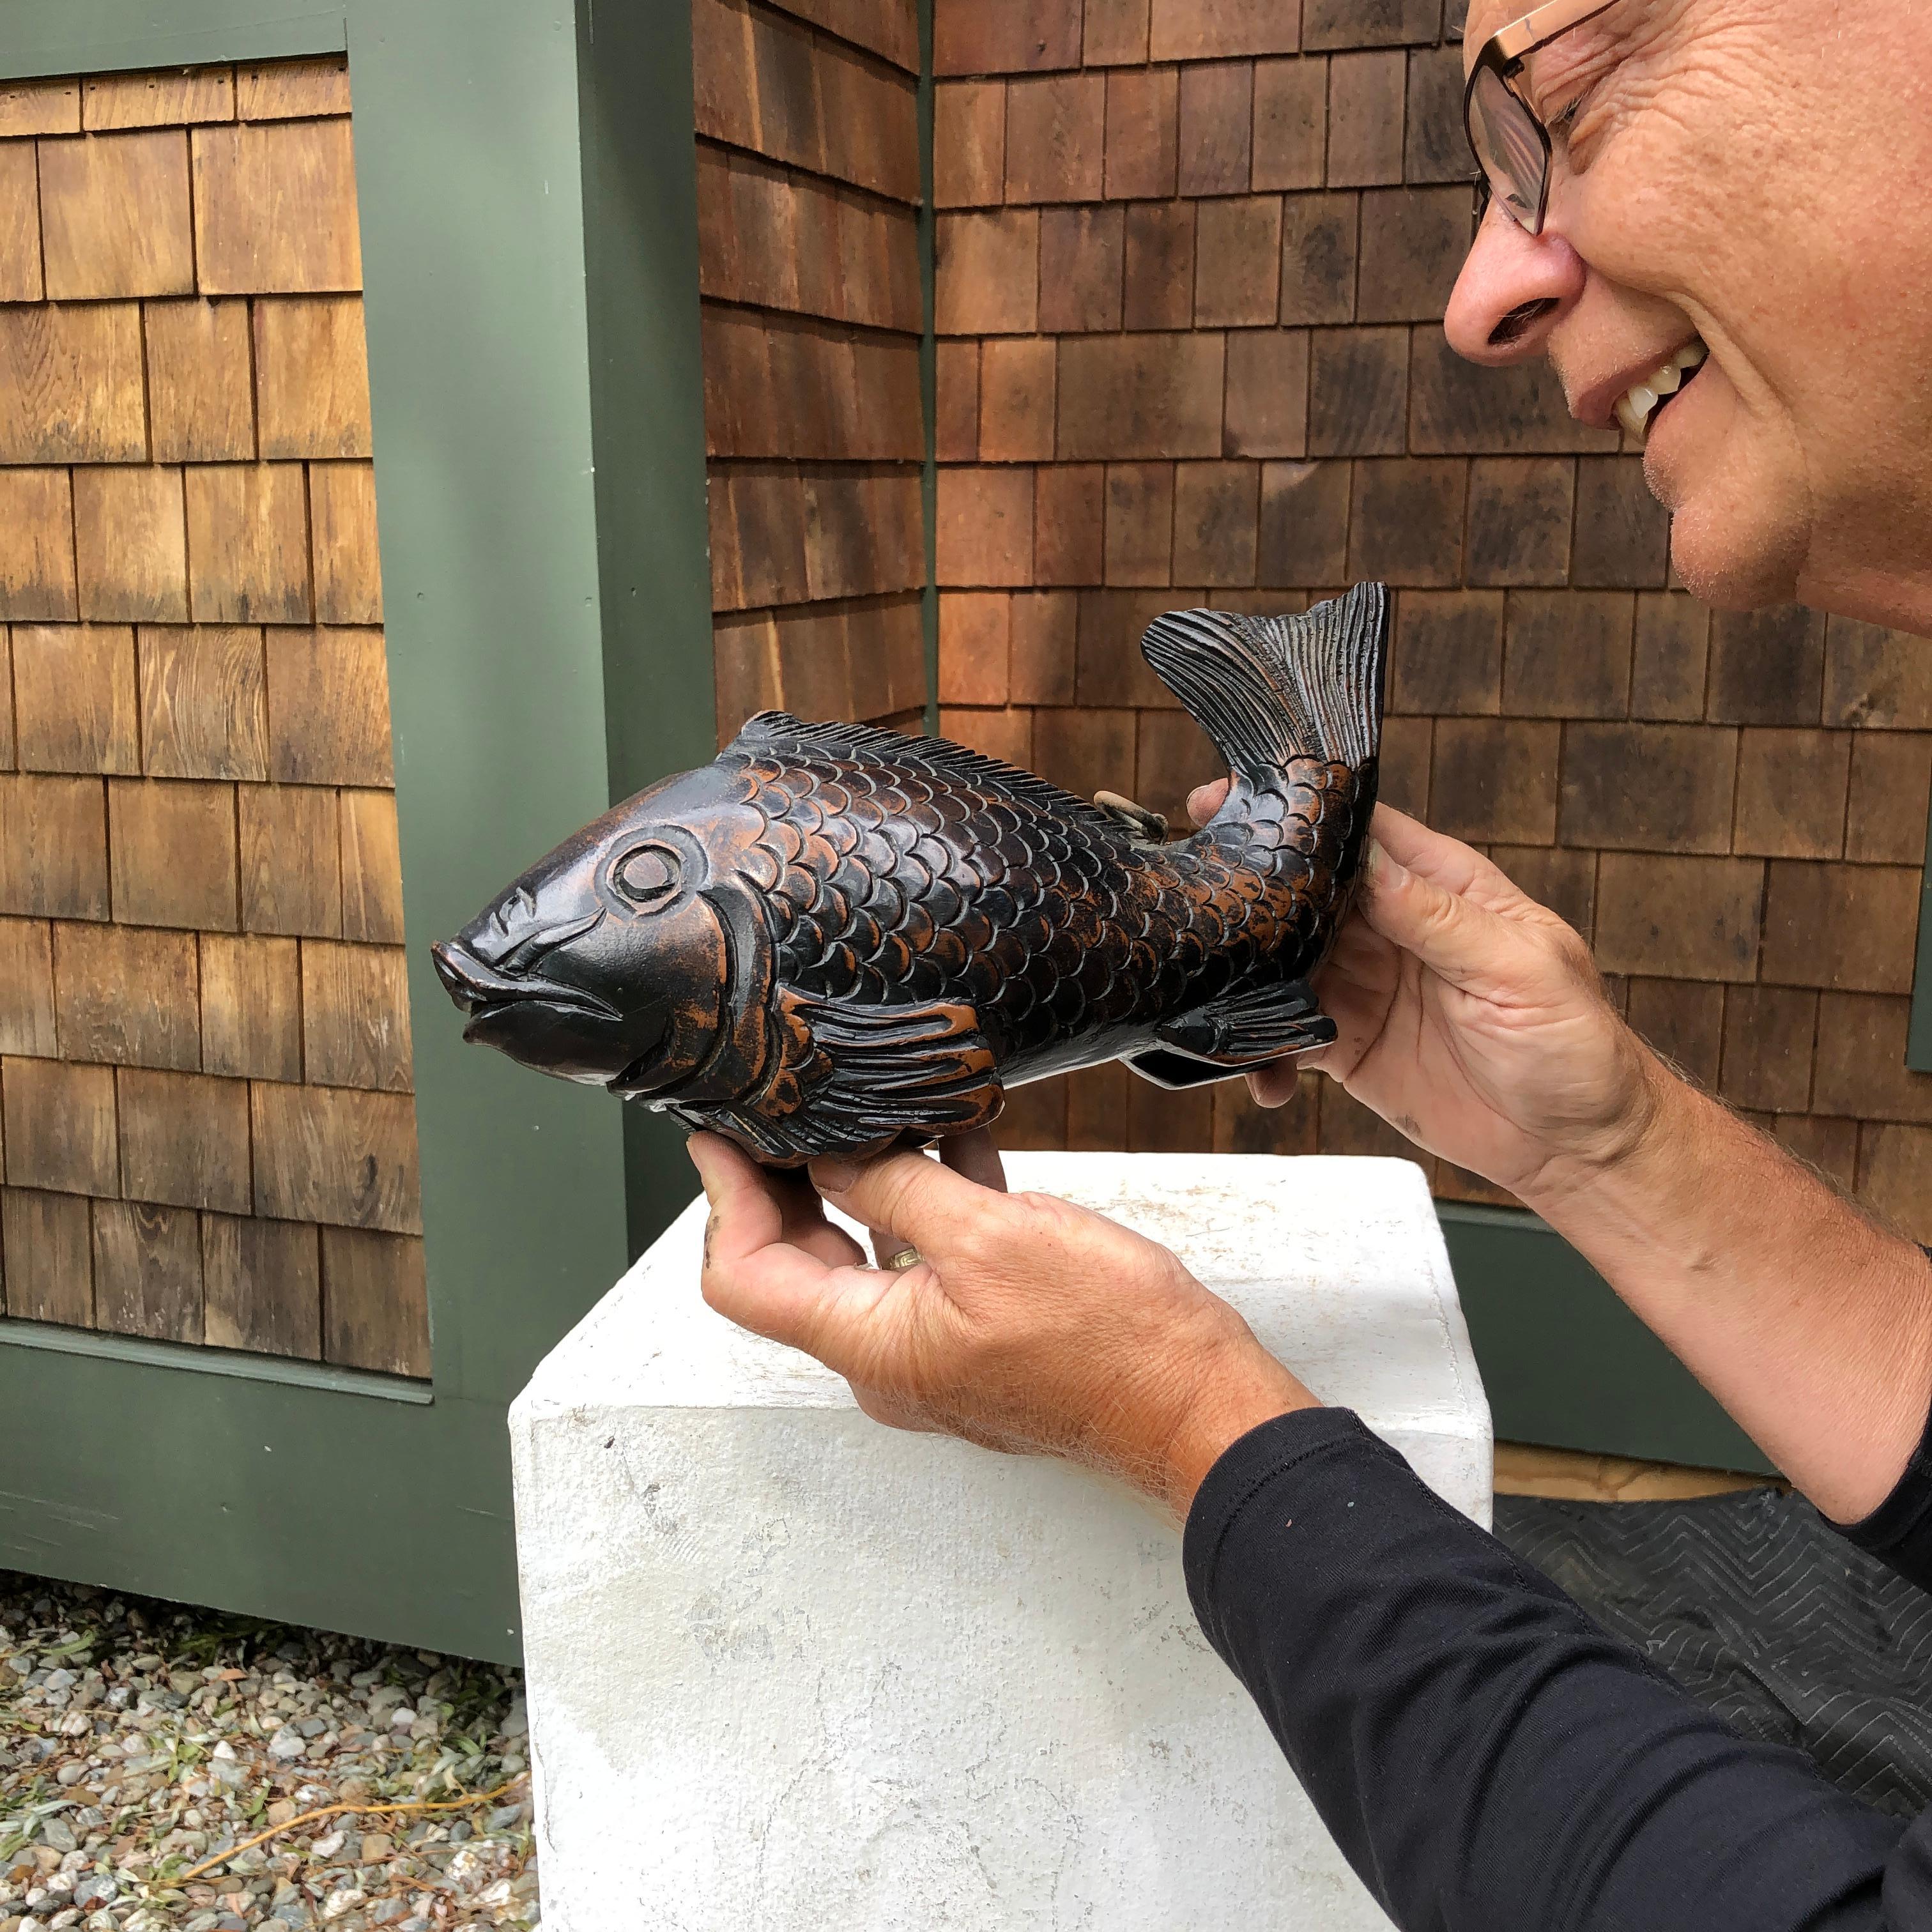 From our recent Japanese Acquisitions Travels- a neat catch with a sassy tail.

A large fine old Japanese 19th century hand carved wooden KOI fish sculpture symbolic of prosperity, perseverance and good fortune. This big fish displays a beautiful